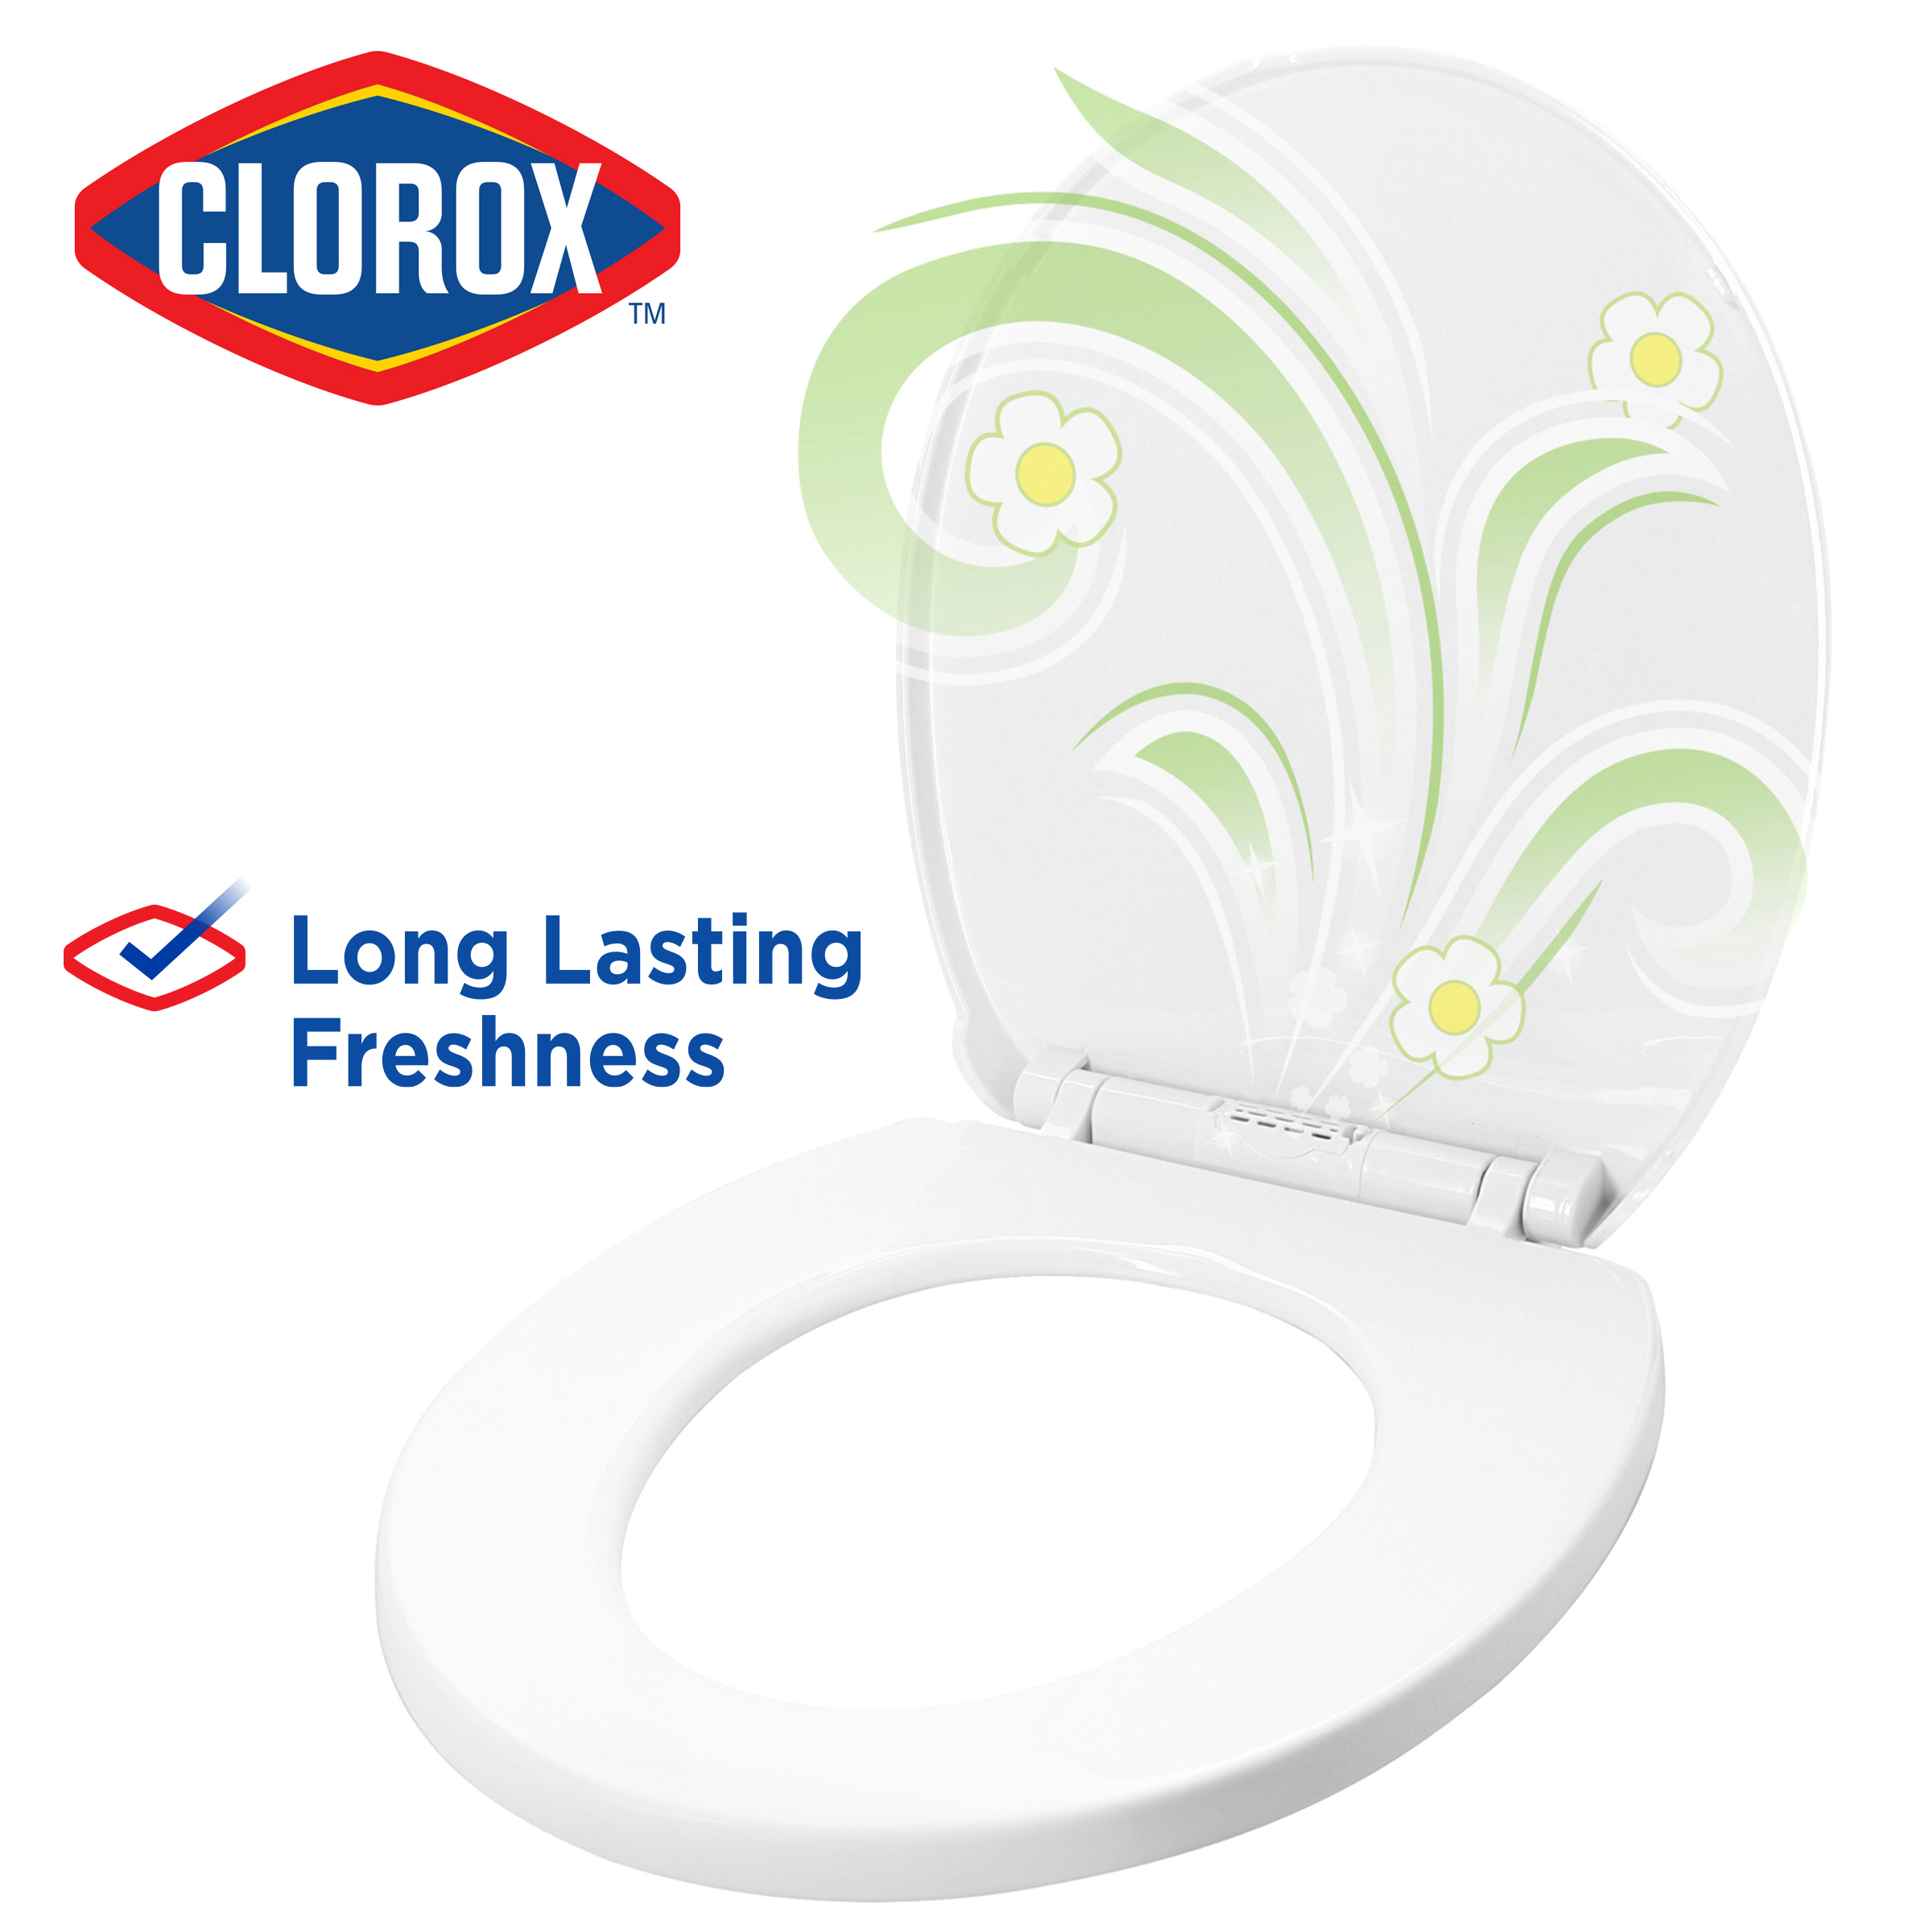 Clorox Antimicrobial Round Stay Fresh Scented Plastic Toilet Seat with Easy-off Hinges - image 1 of 11